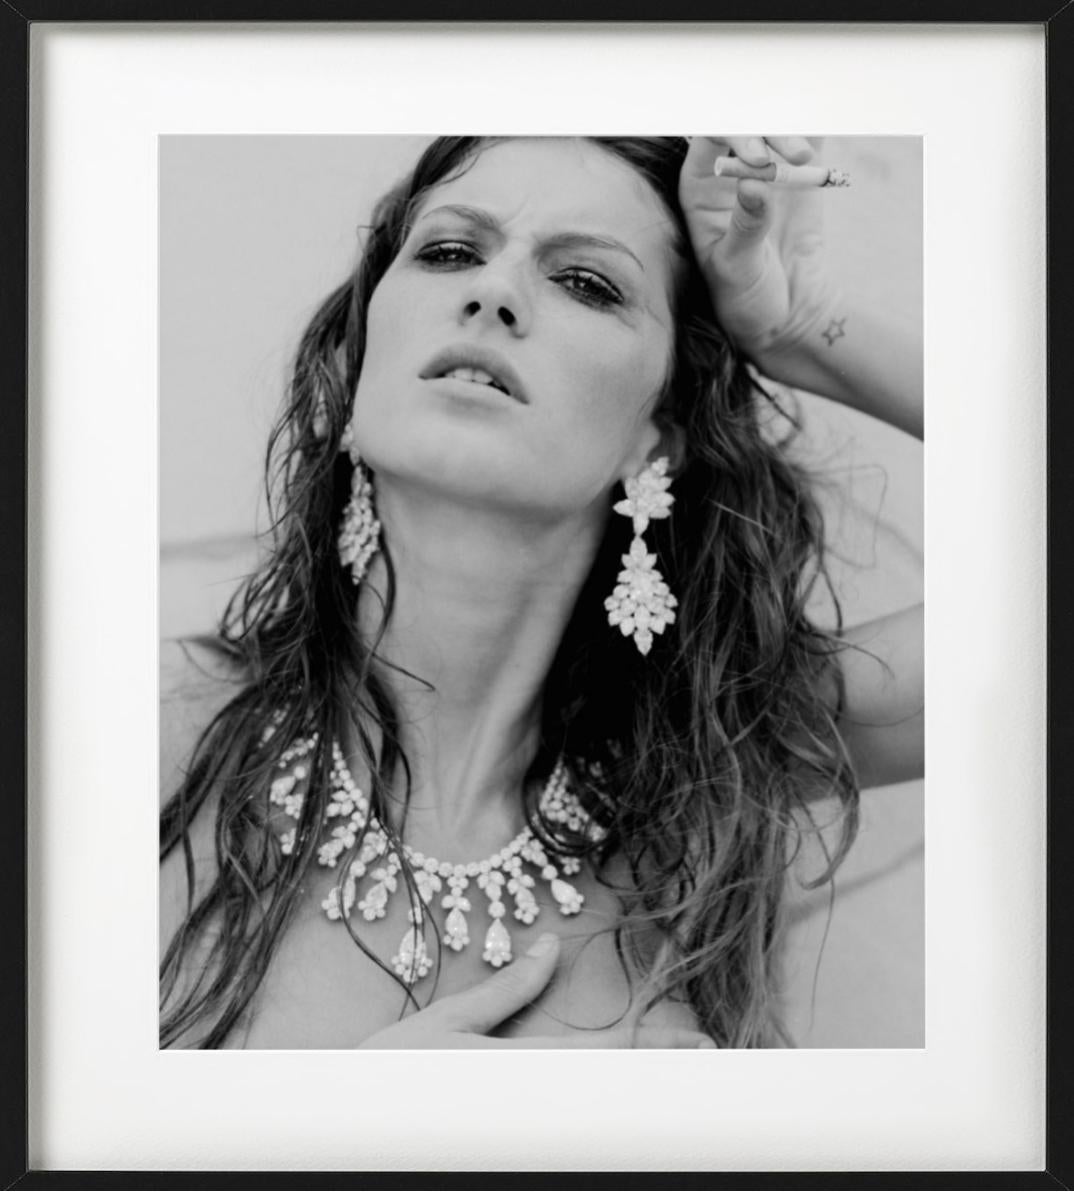 Available in multiple sizes. All prints are limited edition. High-end framing on request.

All prints are done and singed by the artist. The collector receives an additional certificate of authenticity from the gallery.

Portrait of the supermodel